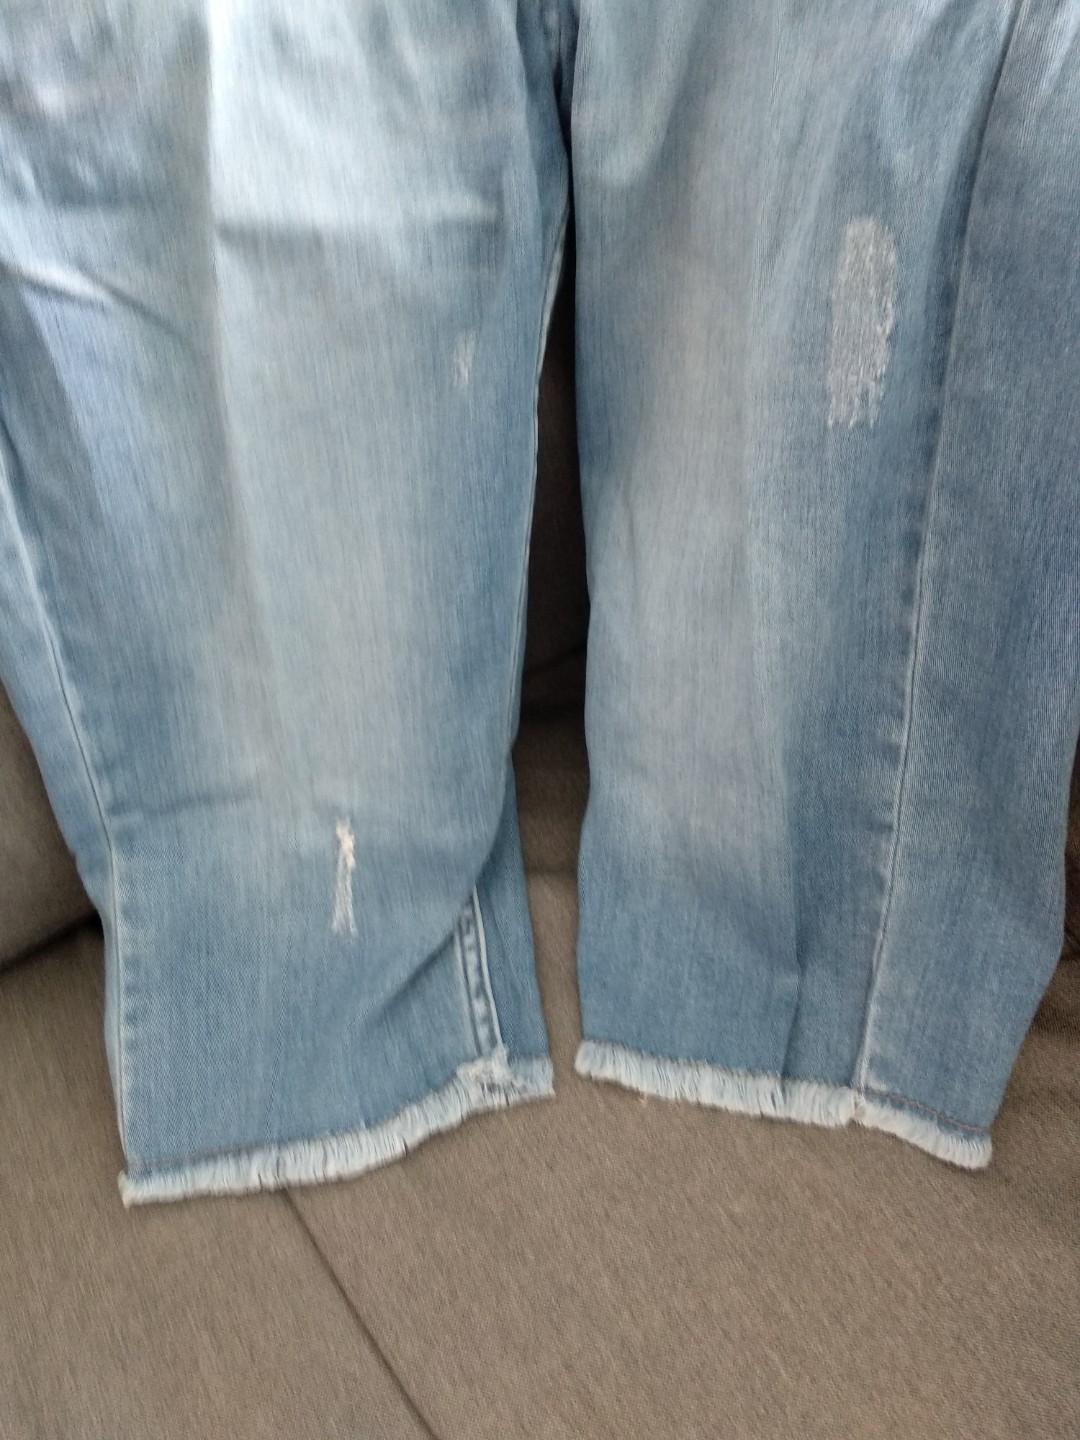 Flies Jeans on Carousell